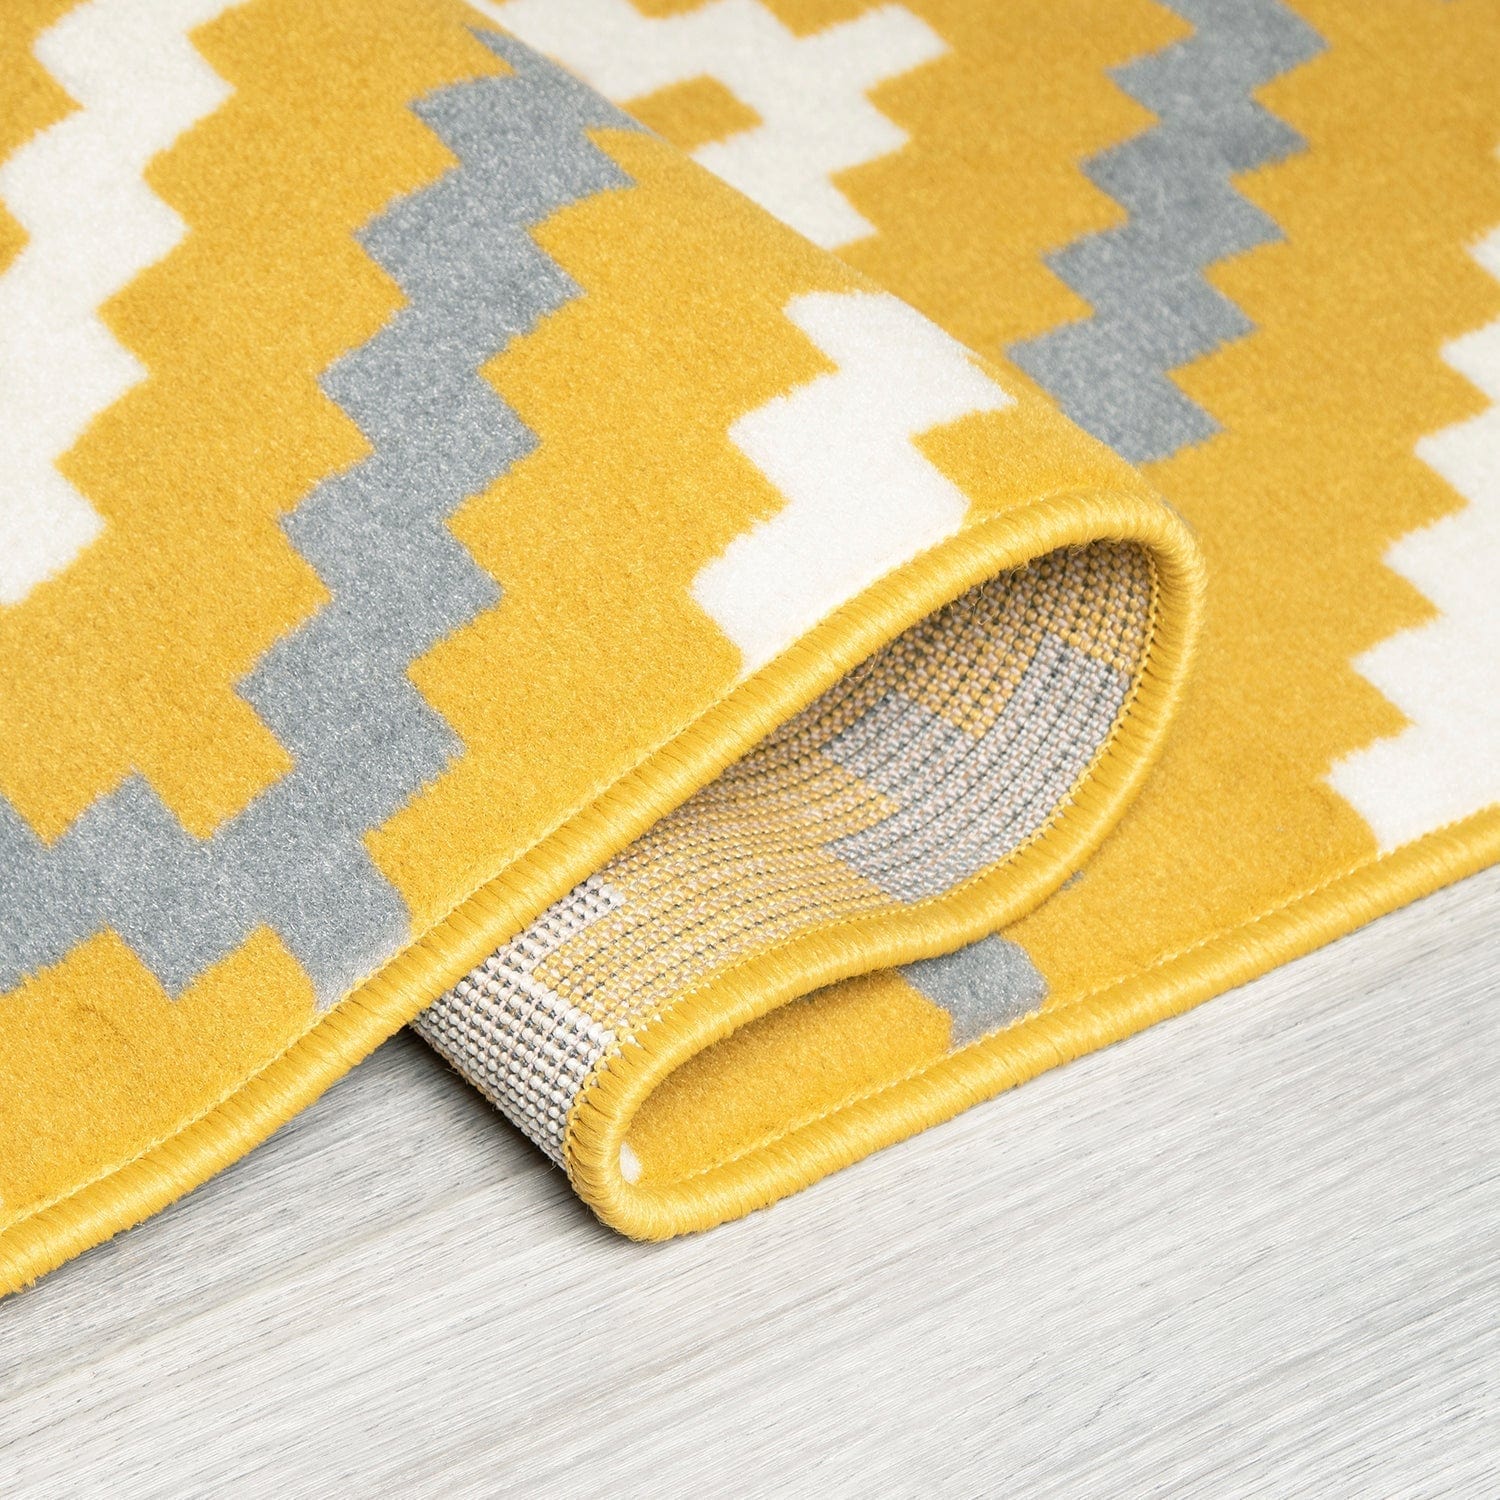 Custom Size Stair Runner | Yellow Geometric Tiles | Only5pounds.com ...